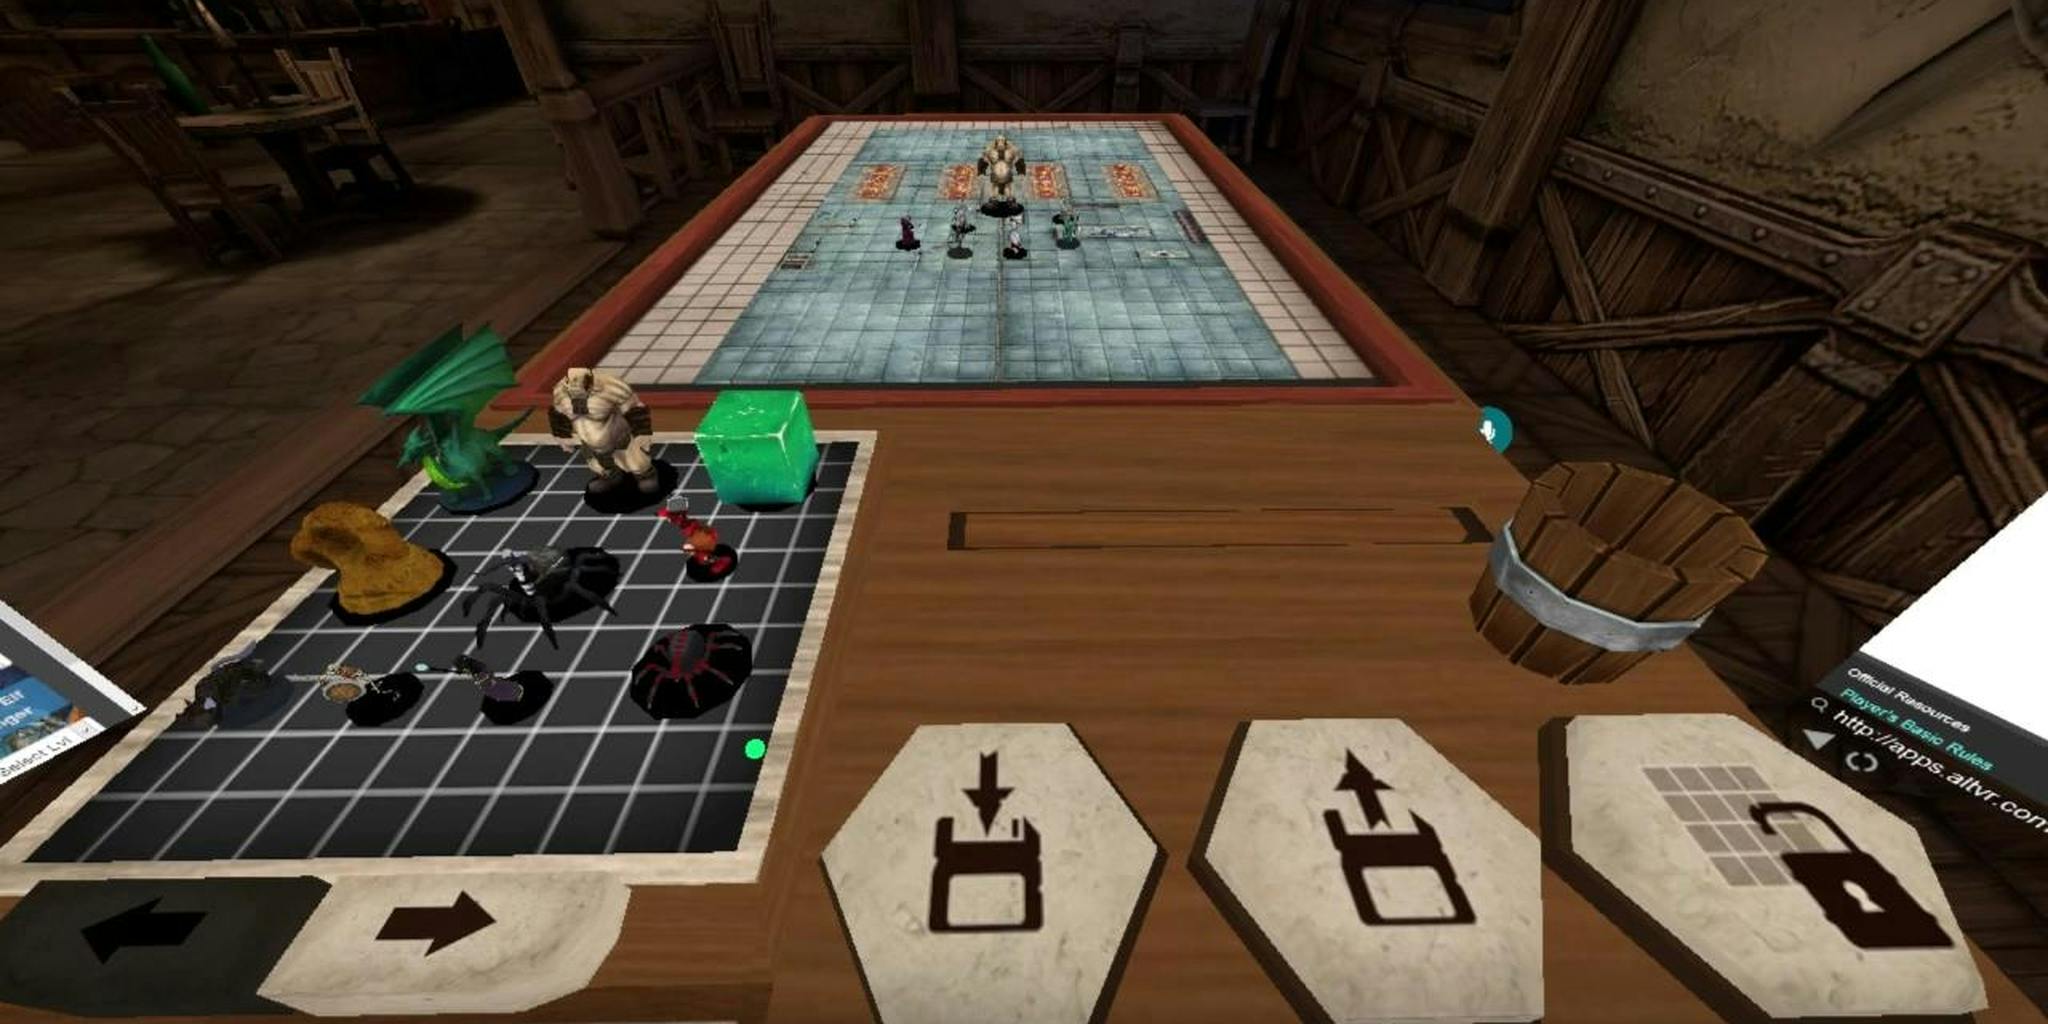 Now meet up for Dungeons Dragons in virtual reality - The Daily Dot